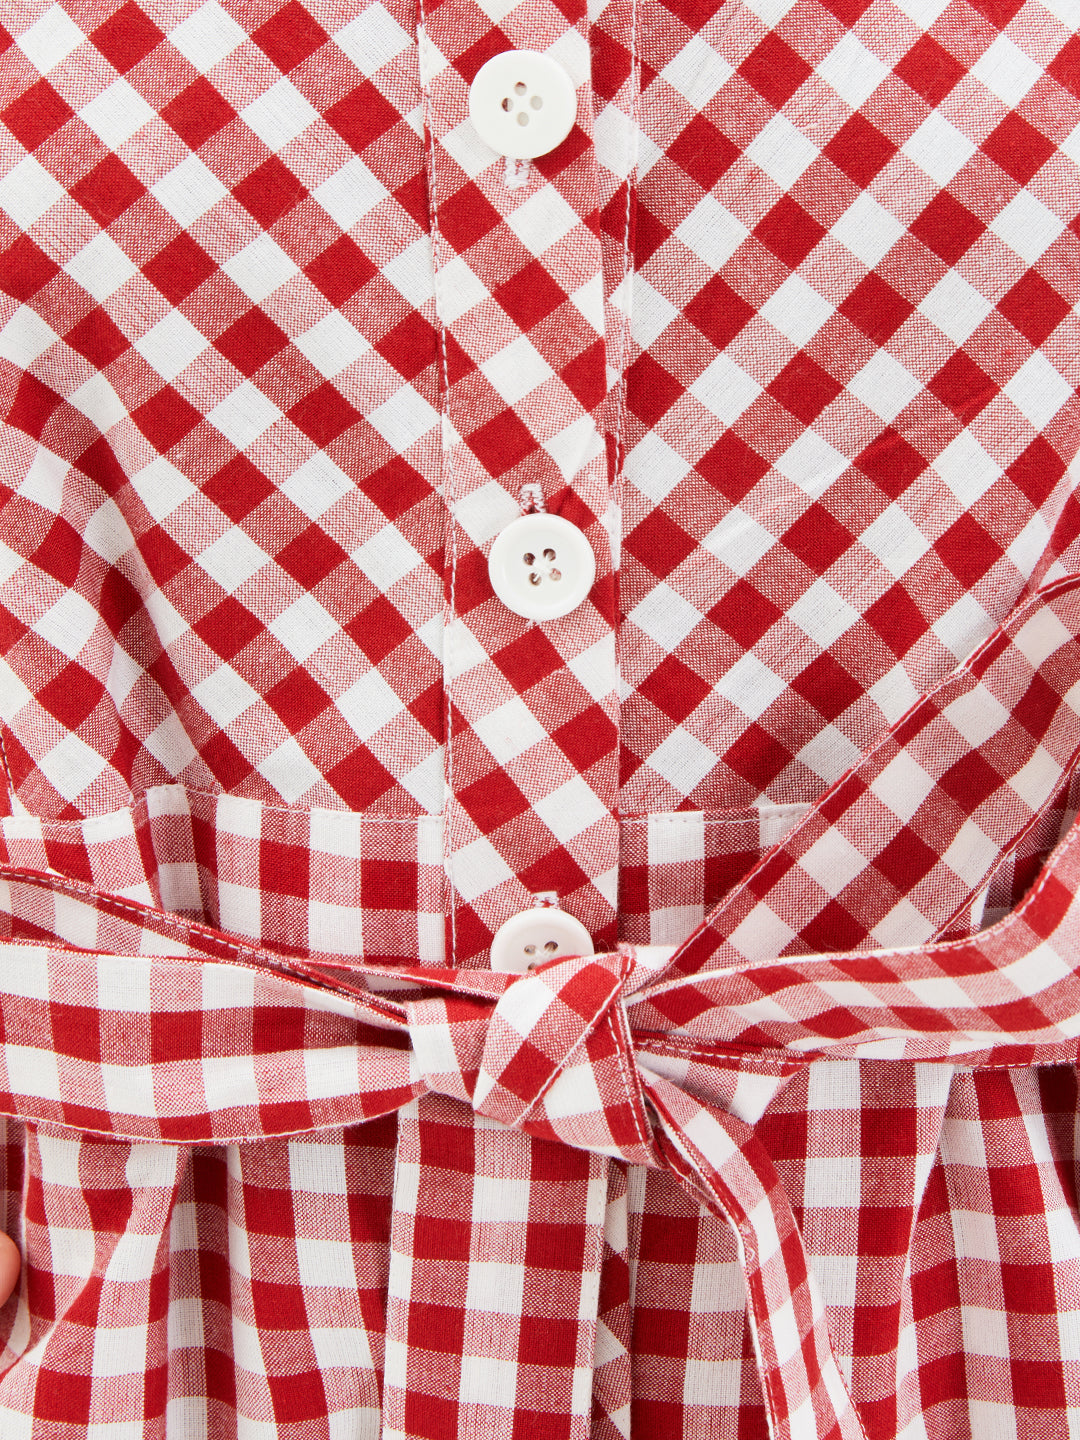 Olele® June Jumpsuit - Red and White Gingham Check